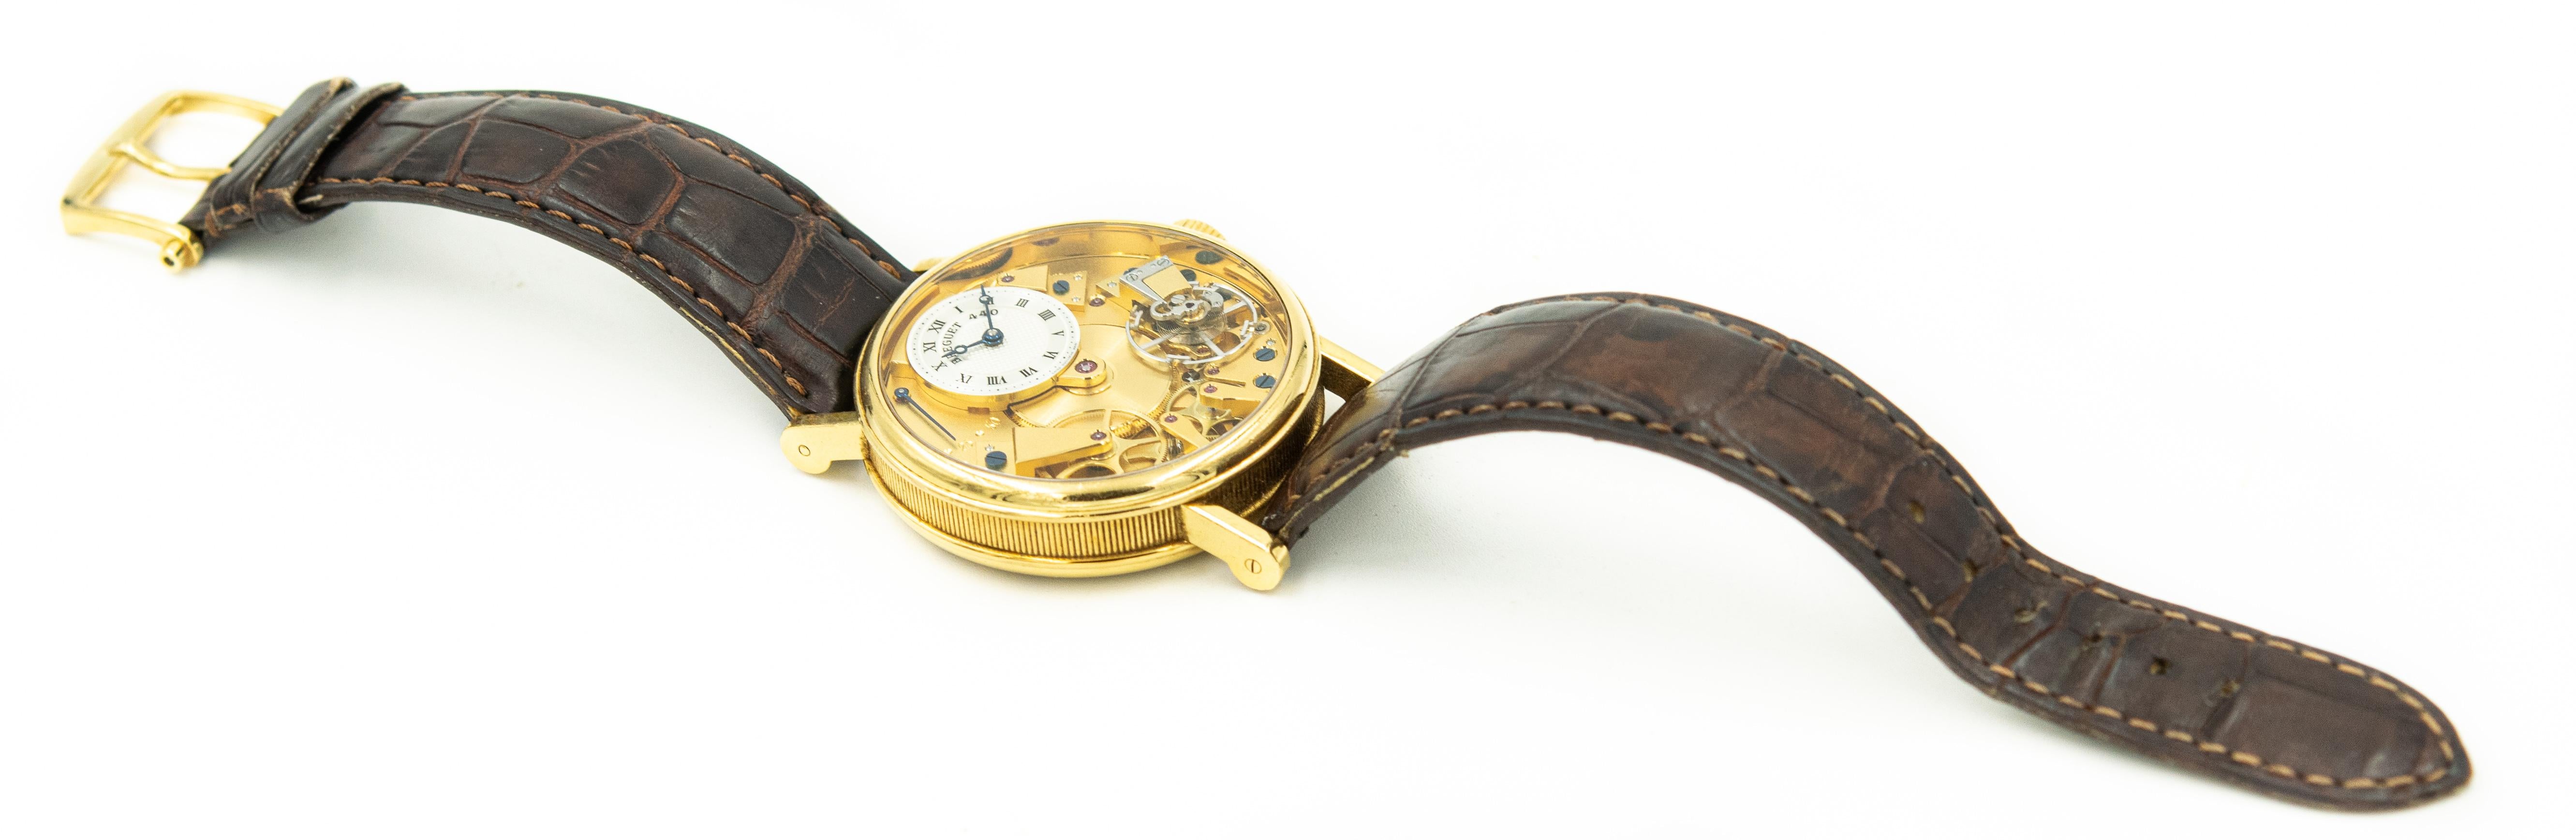 Breguet La Tradition Ref. 7027 Serial # 440 V 18k yellow gold semi-skeletonized wristwatch with power reserve indication.
Dial: gilt, semi skeletonized
Caliber: cal. 507DR manual winding, 34 jewels
Movement number:  0603015
Case: 18K yellow gold,